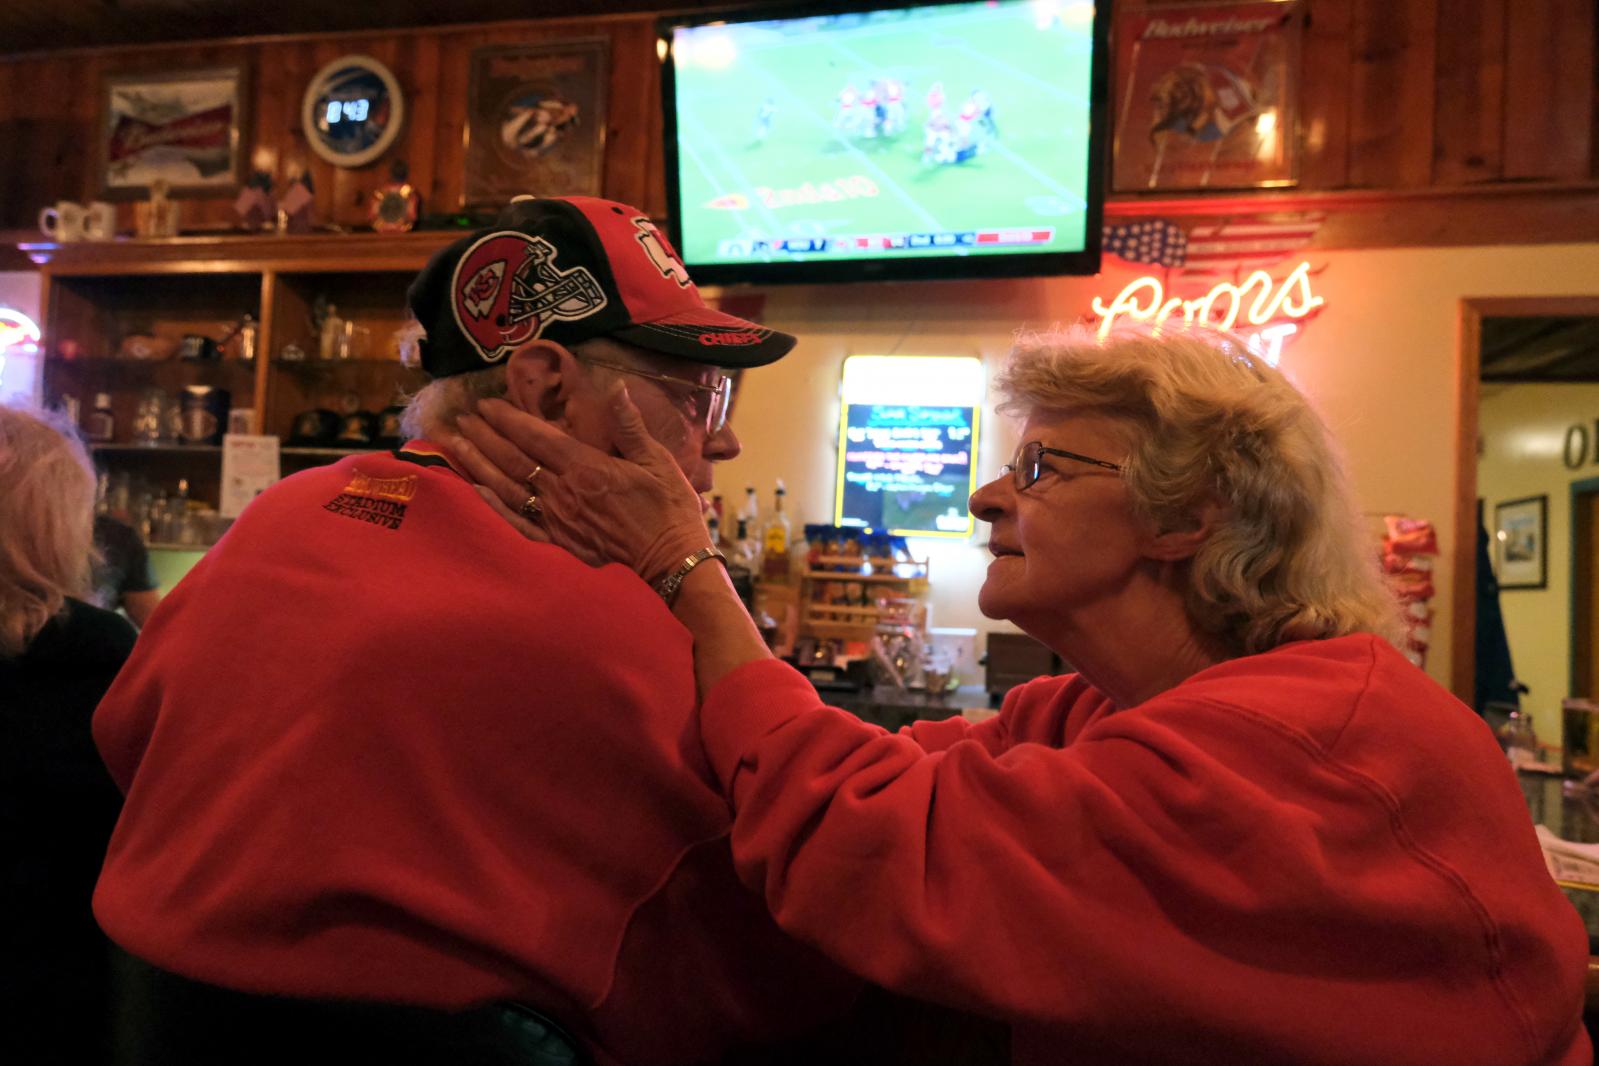 A couple shares an intimate moment at the VFW on the first day of the NFL season for Reuters.